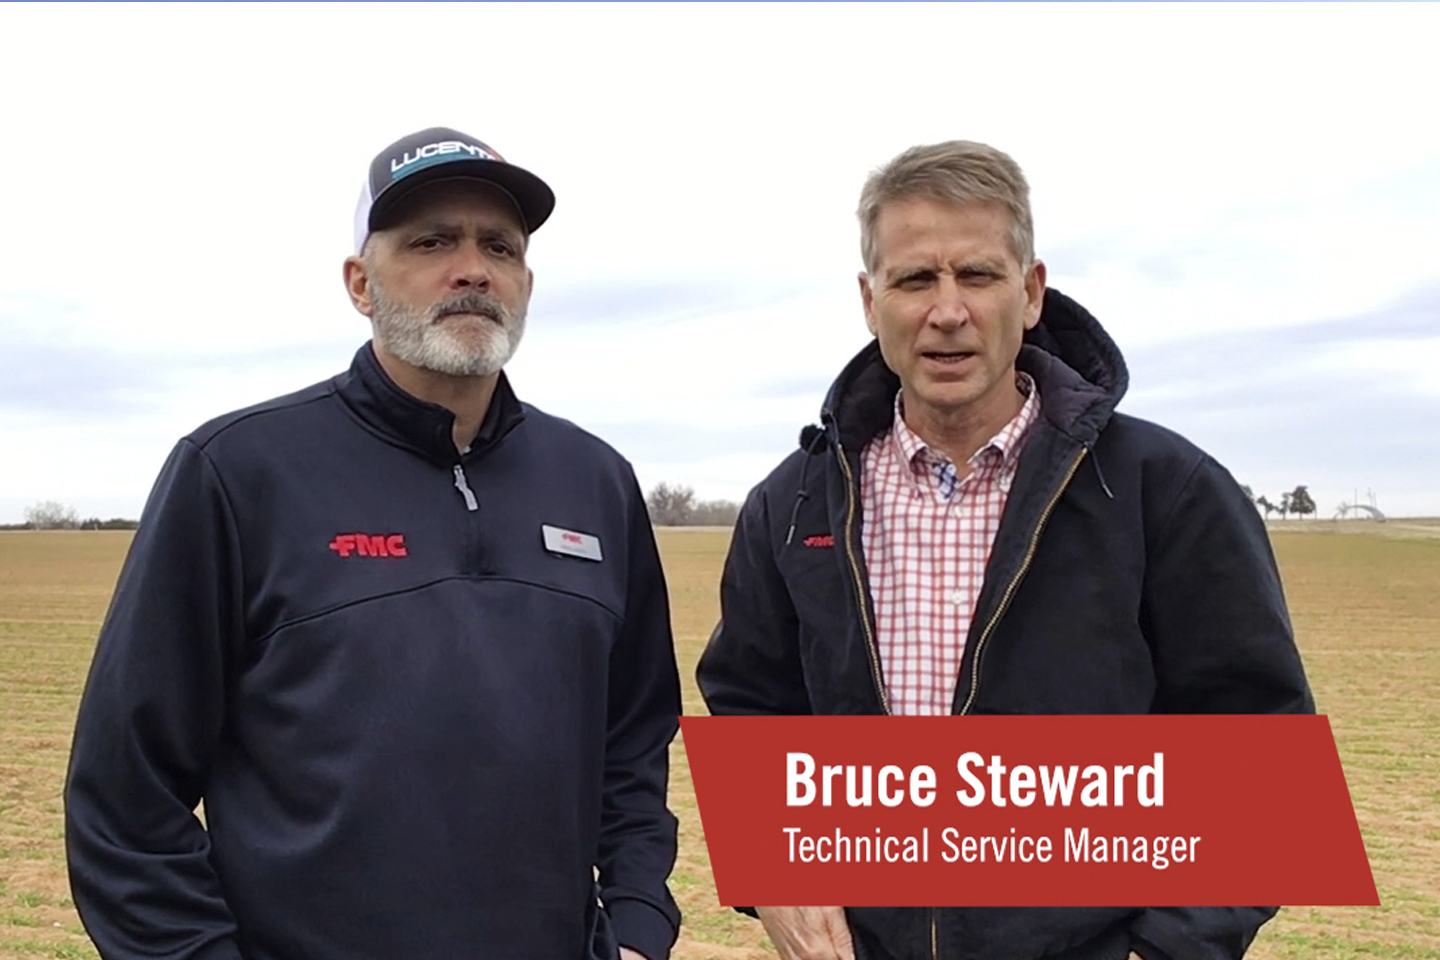 Technical Service Manager Bruce Steward and Regional Market Manager Greg Justice